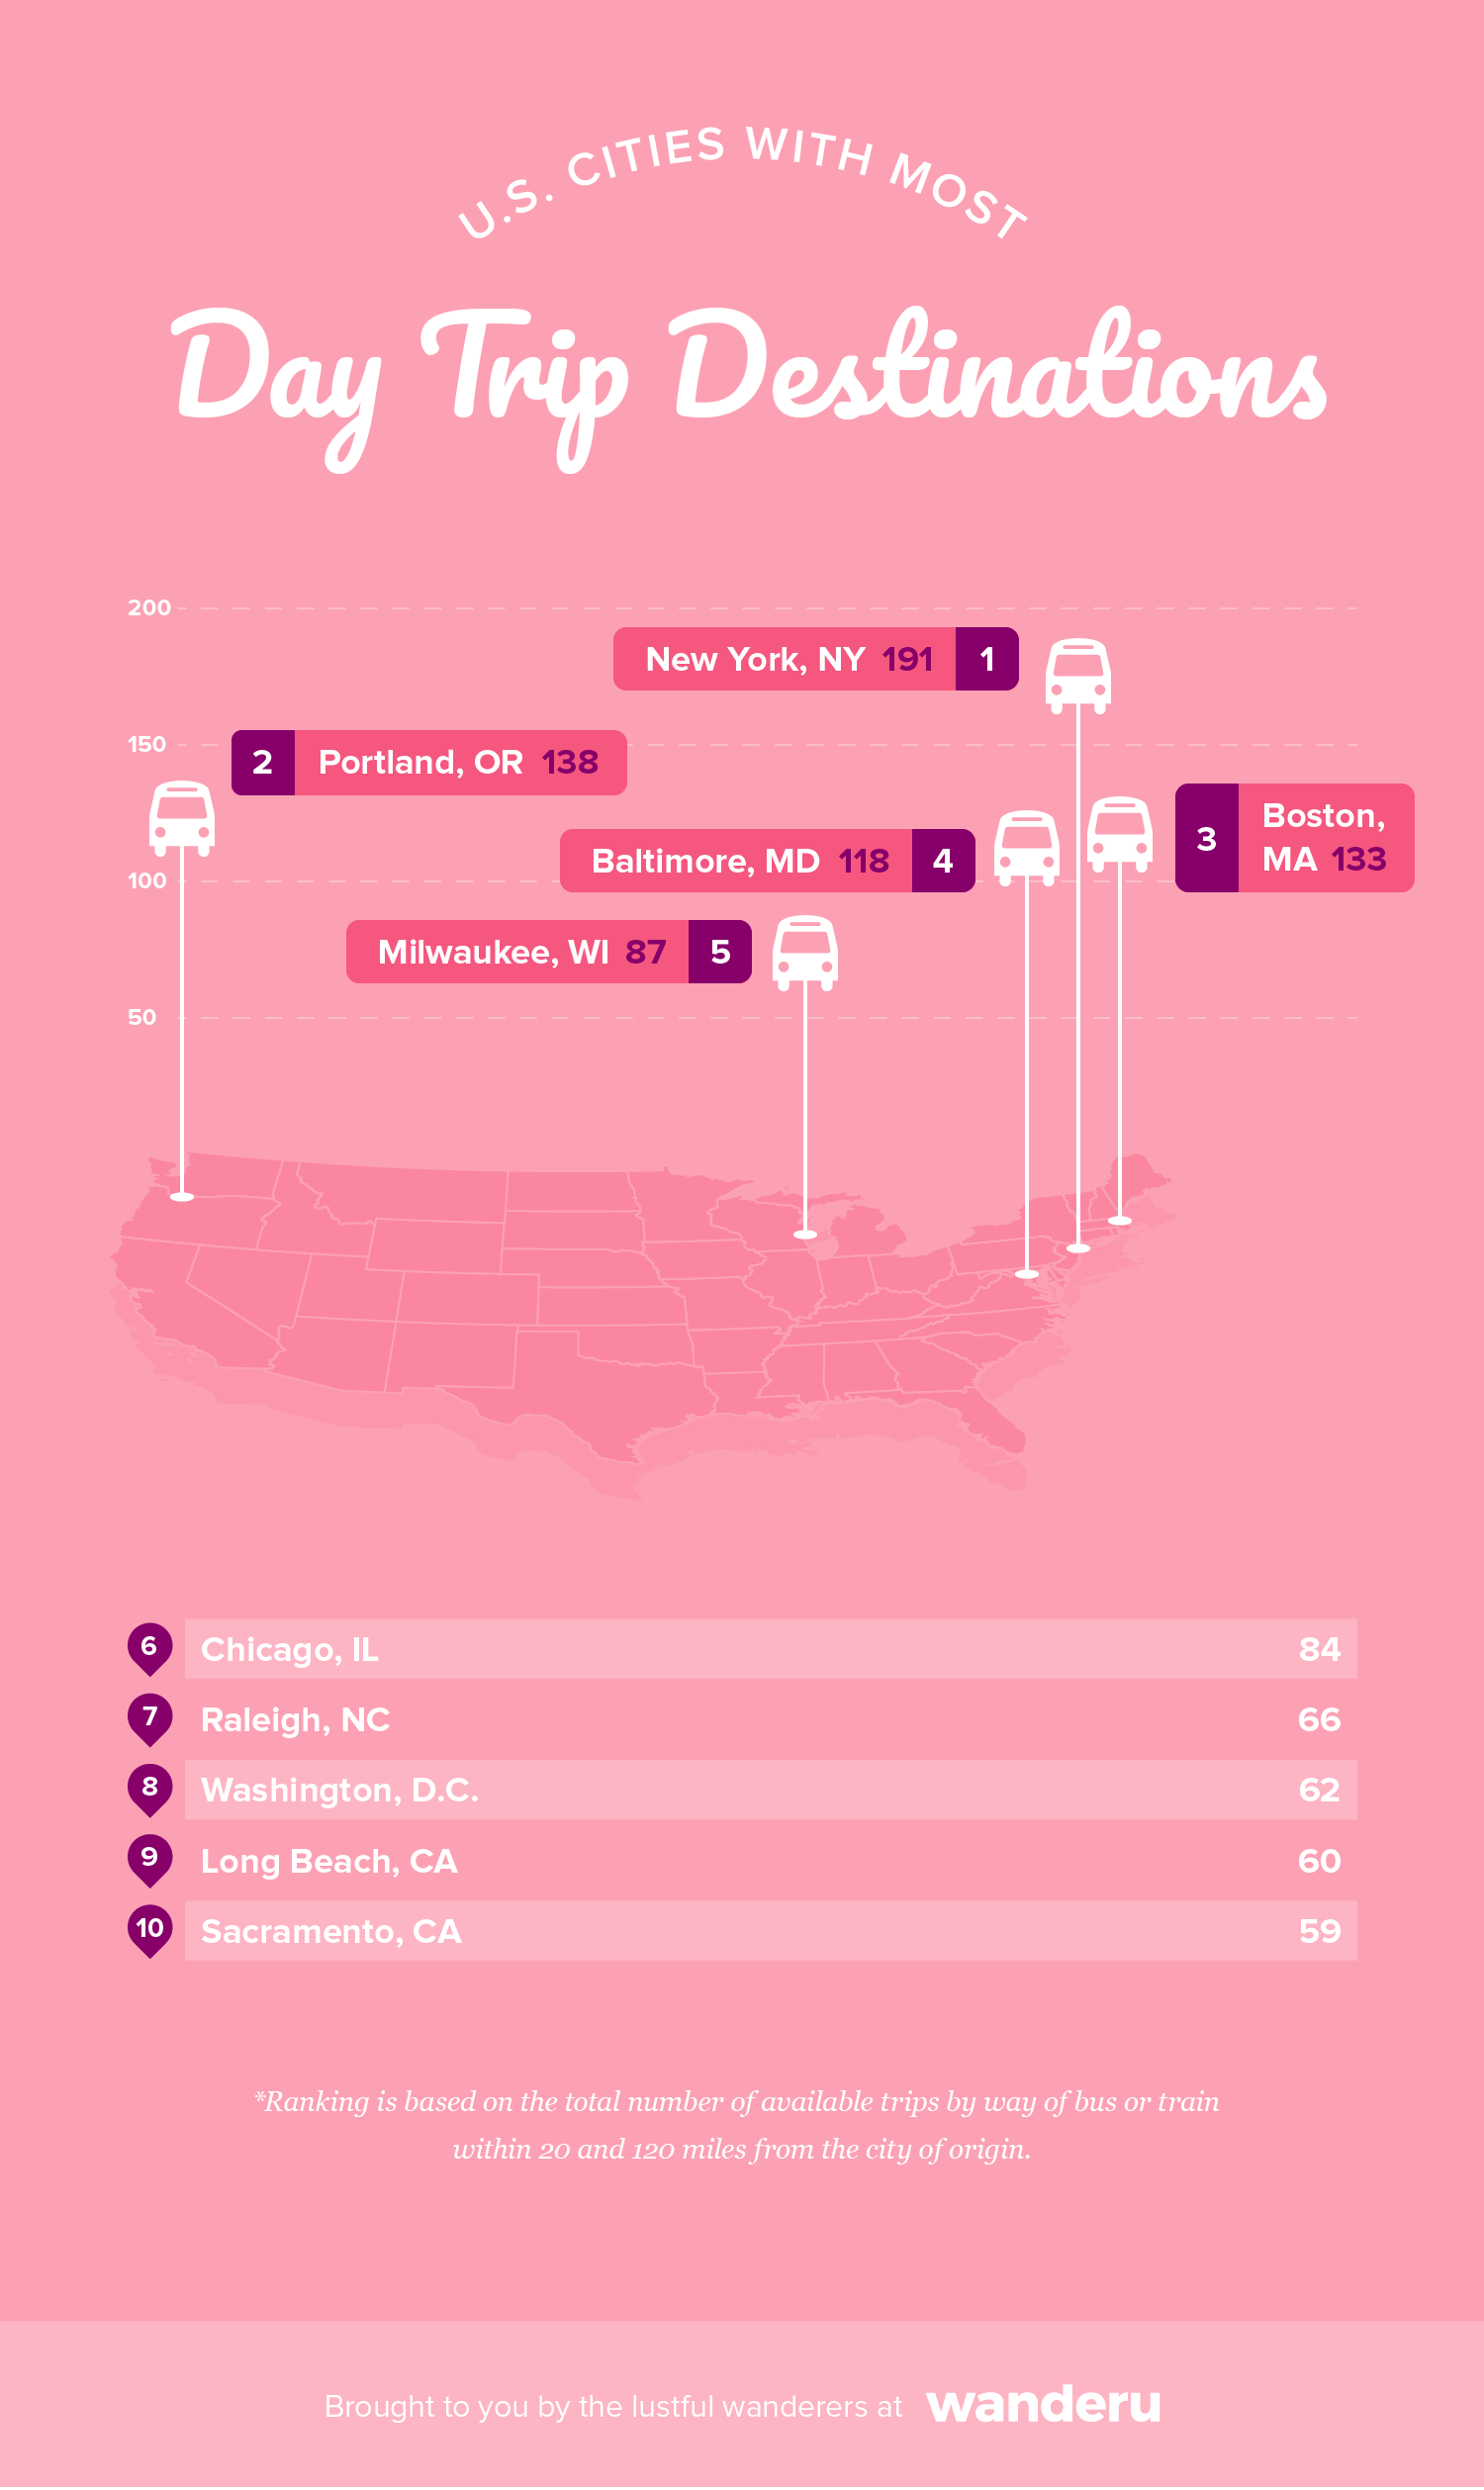 Graphic shows the 10 cities in the U.S. with the most day-trip destinations via bus or train.